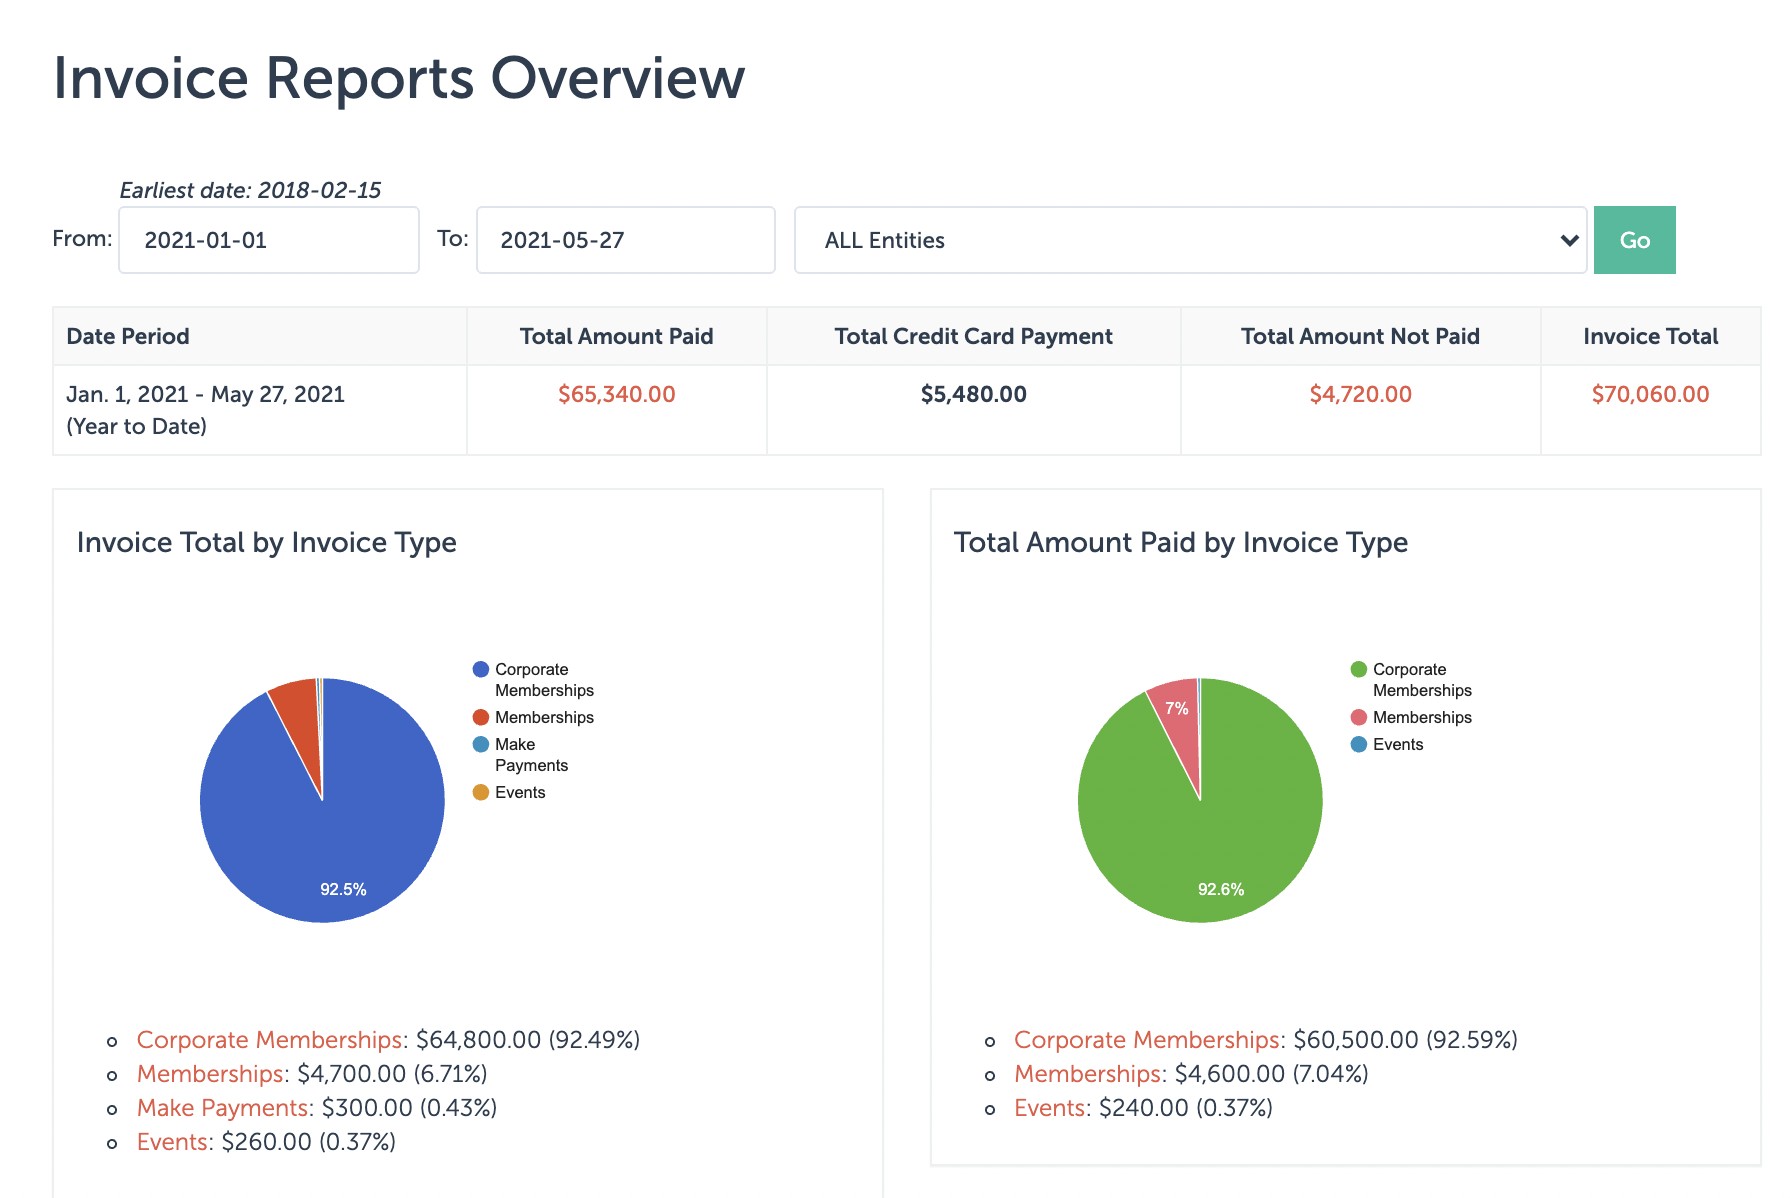 Invoices Overview Report